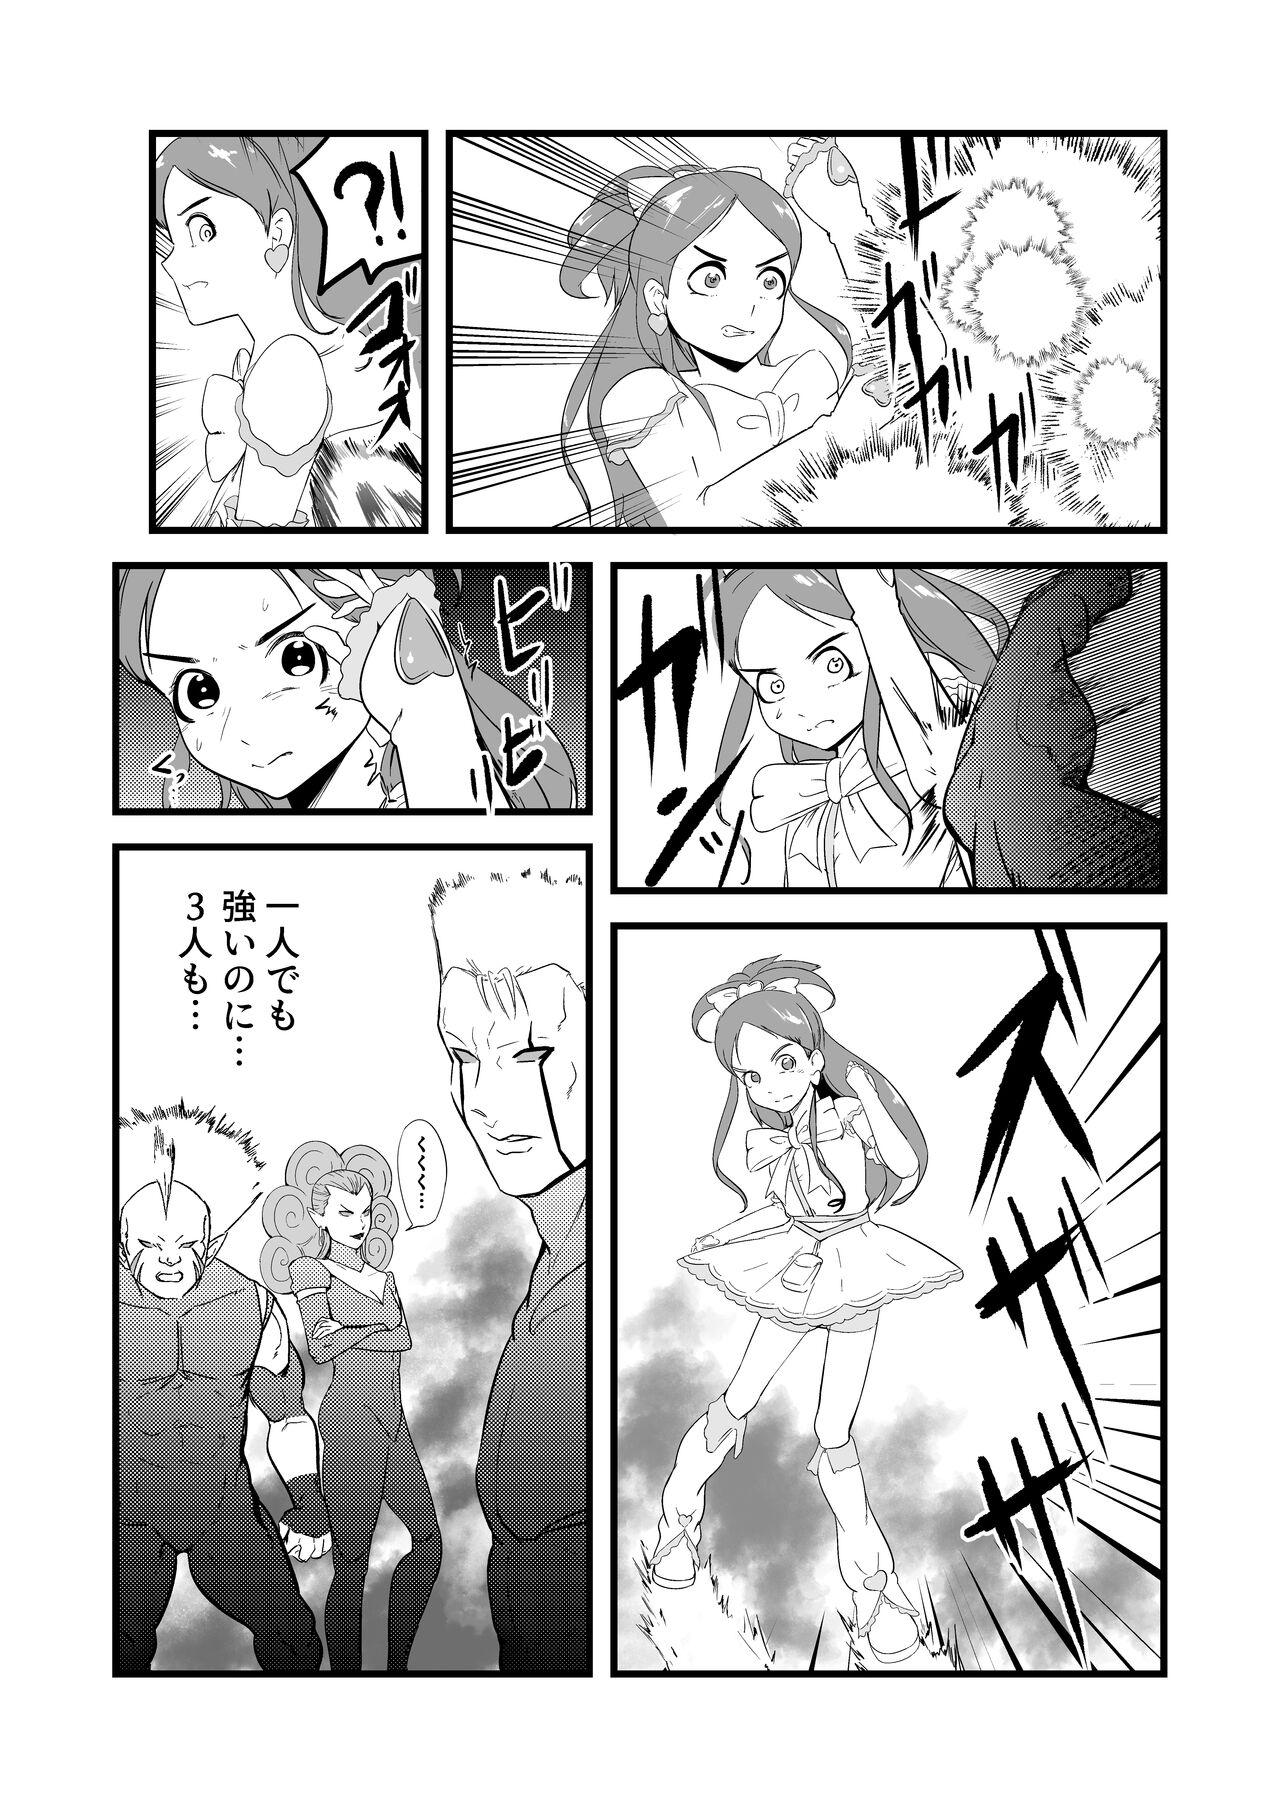 Analfuck Belly Crisis 7 - Pretty cure Bigtits - Page 9